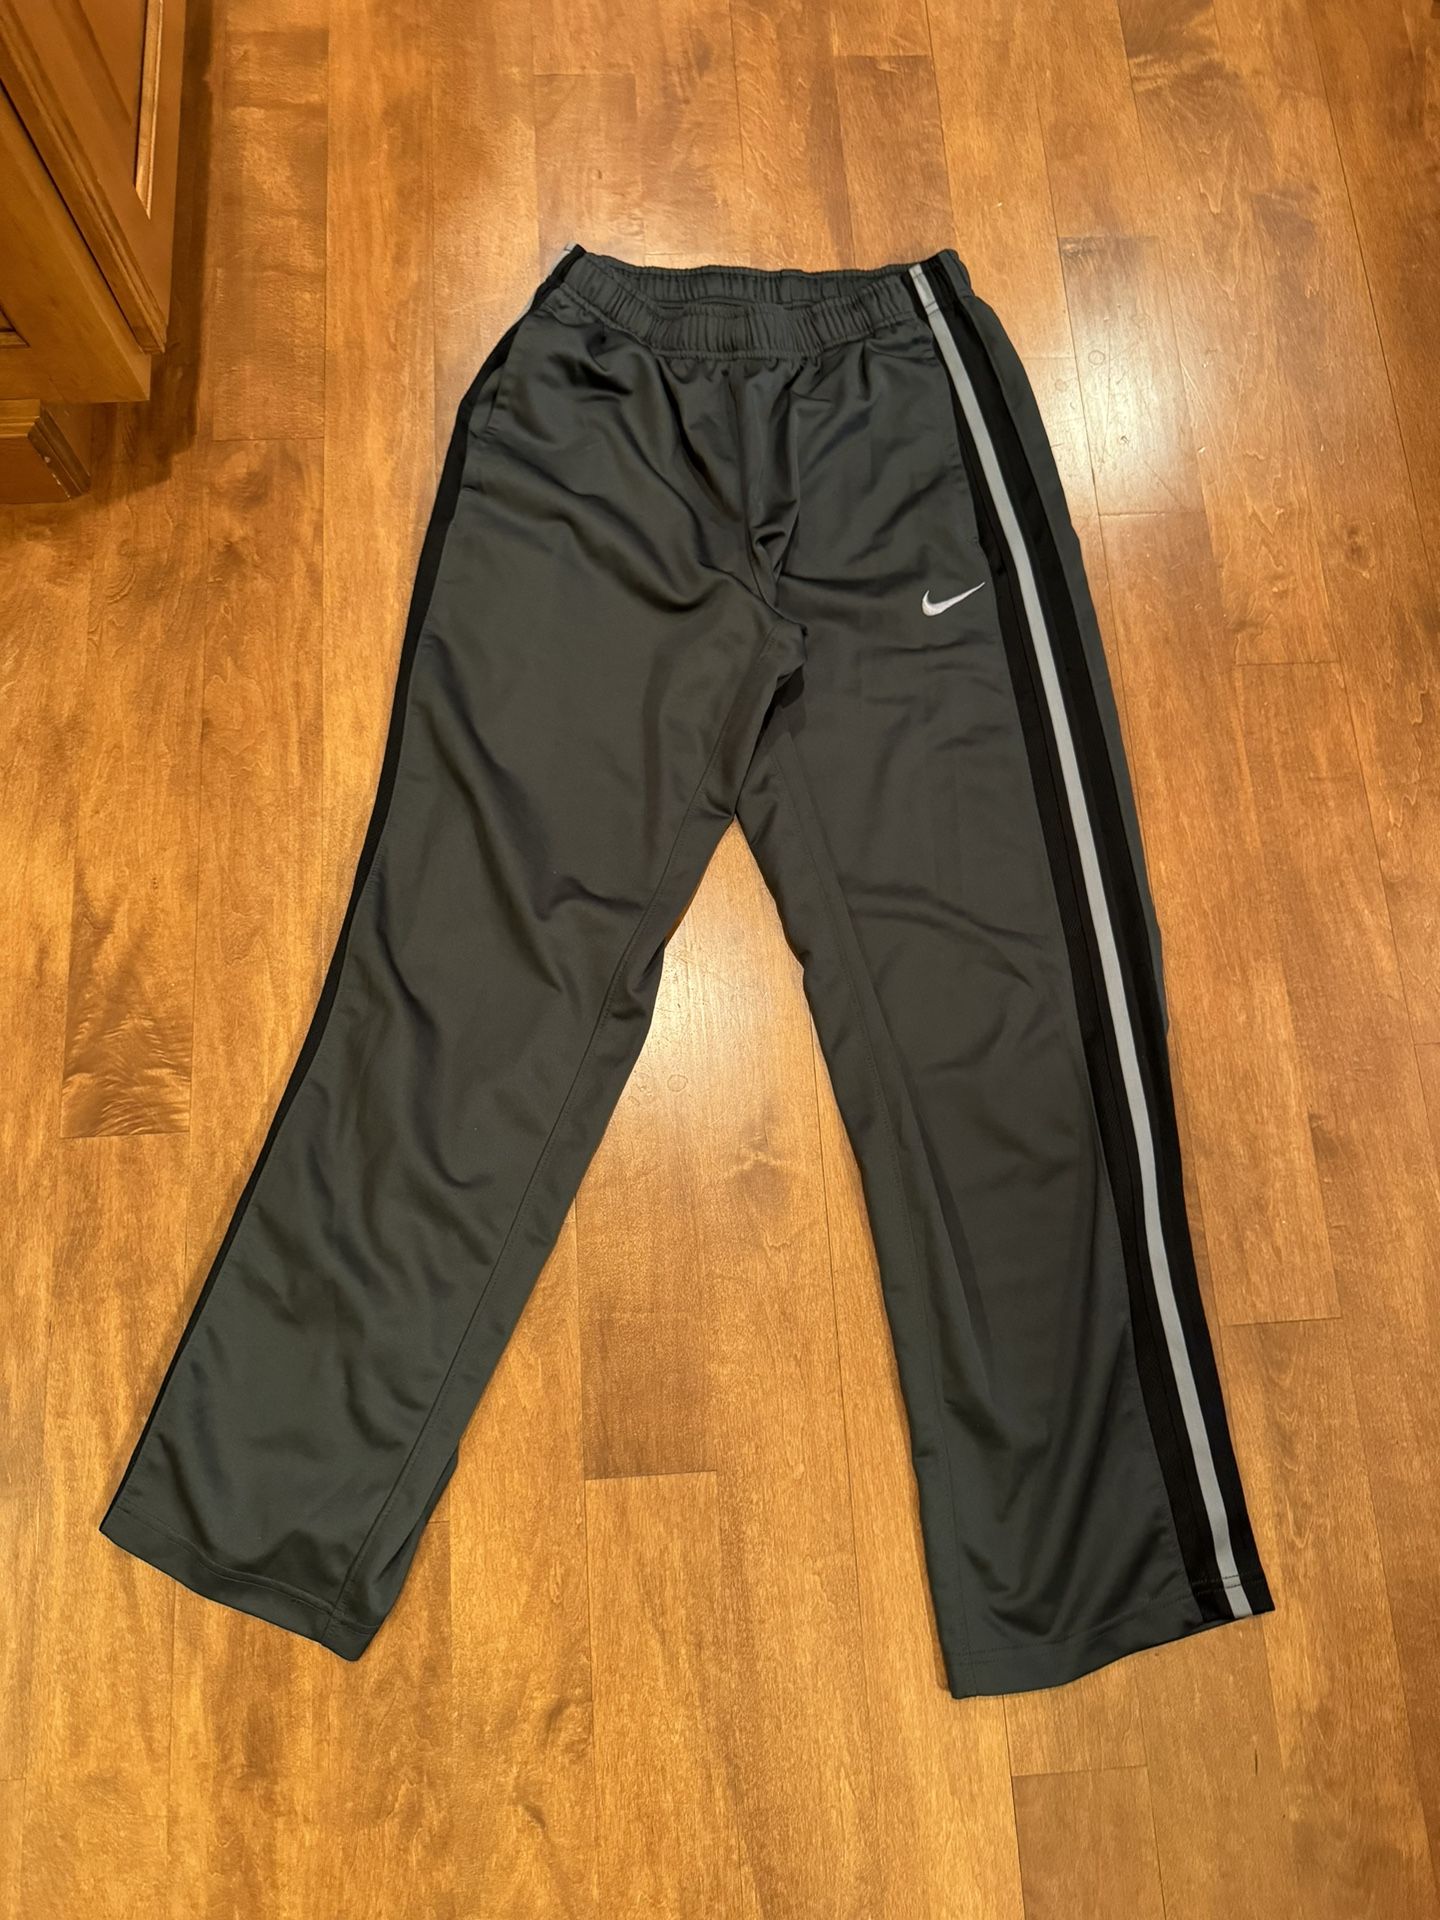 Men’s Nike Joggers Shipping Available